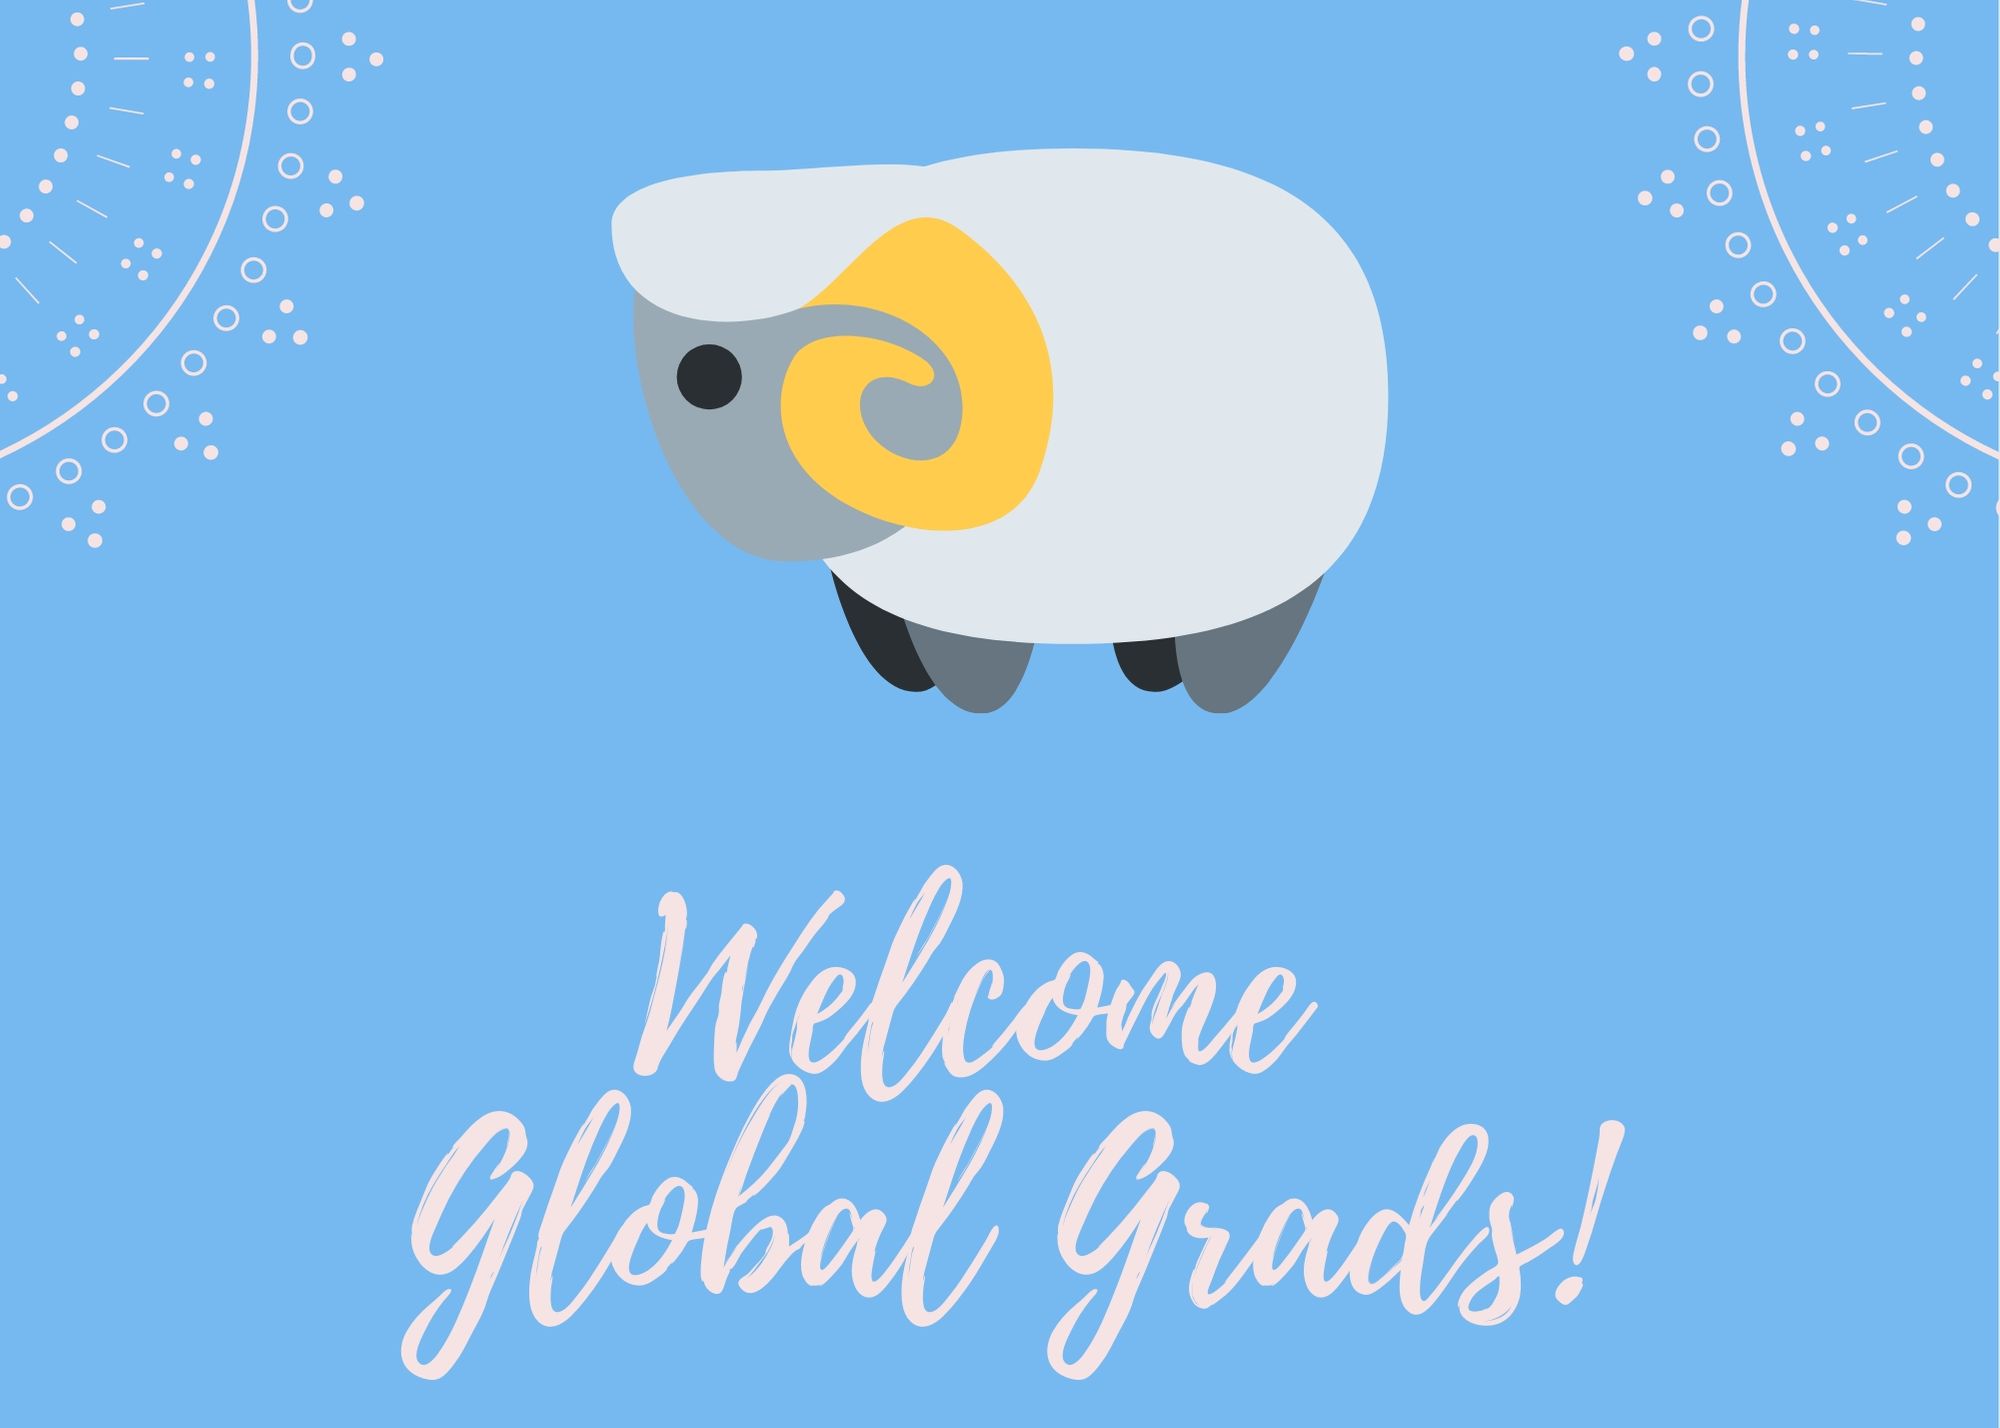 Welcome Globabl Grads with image of a ram